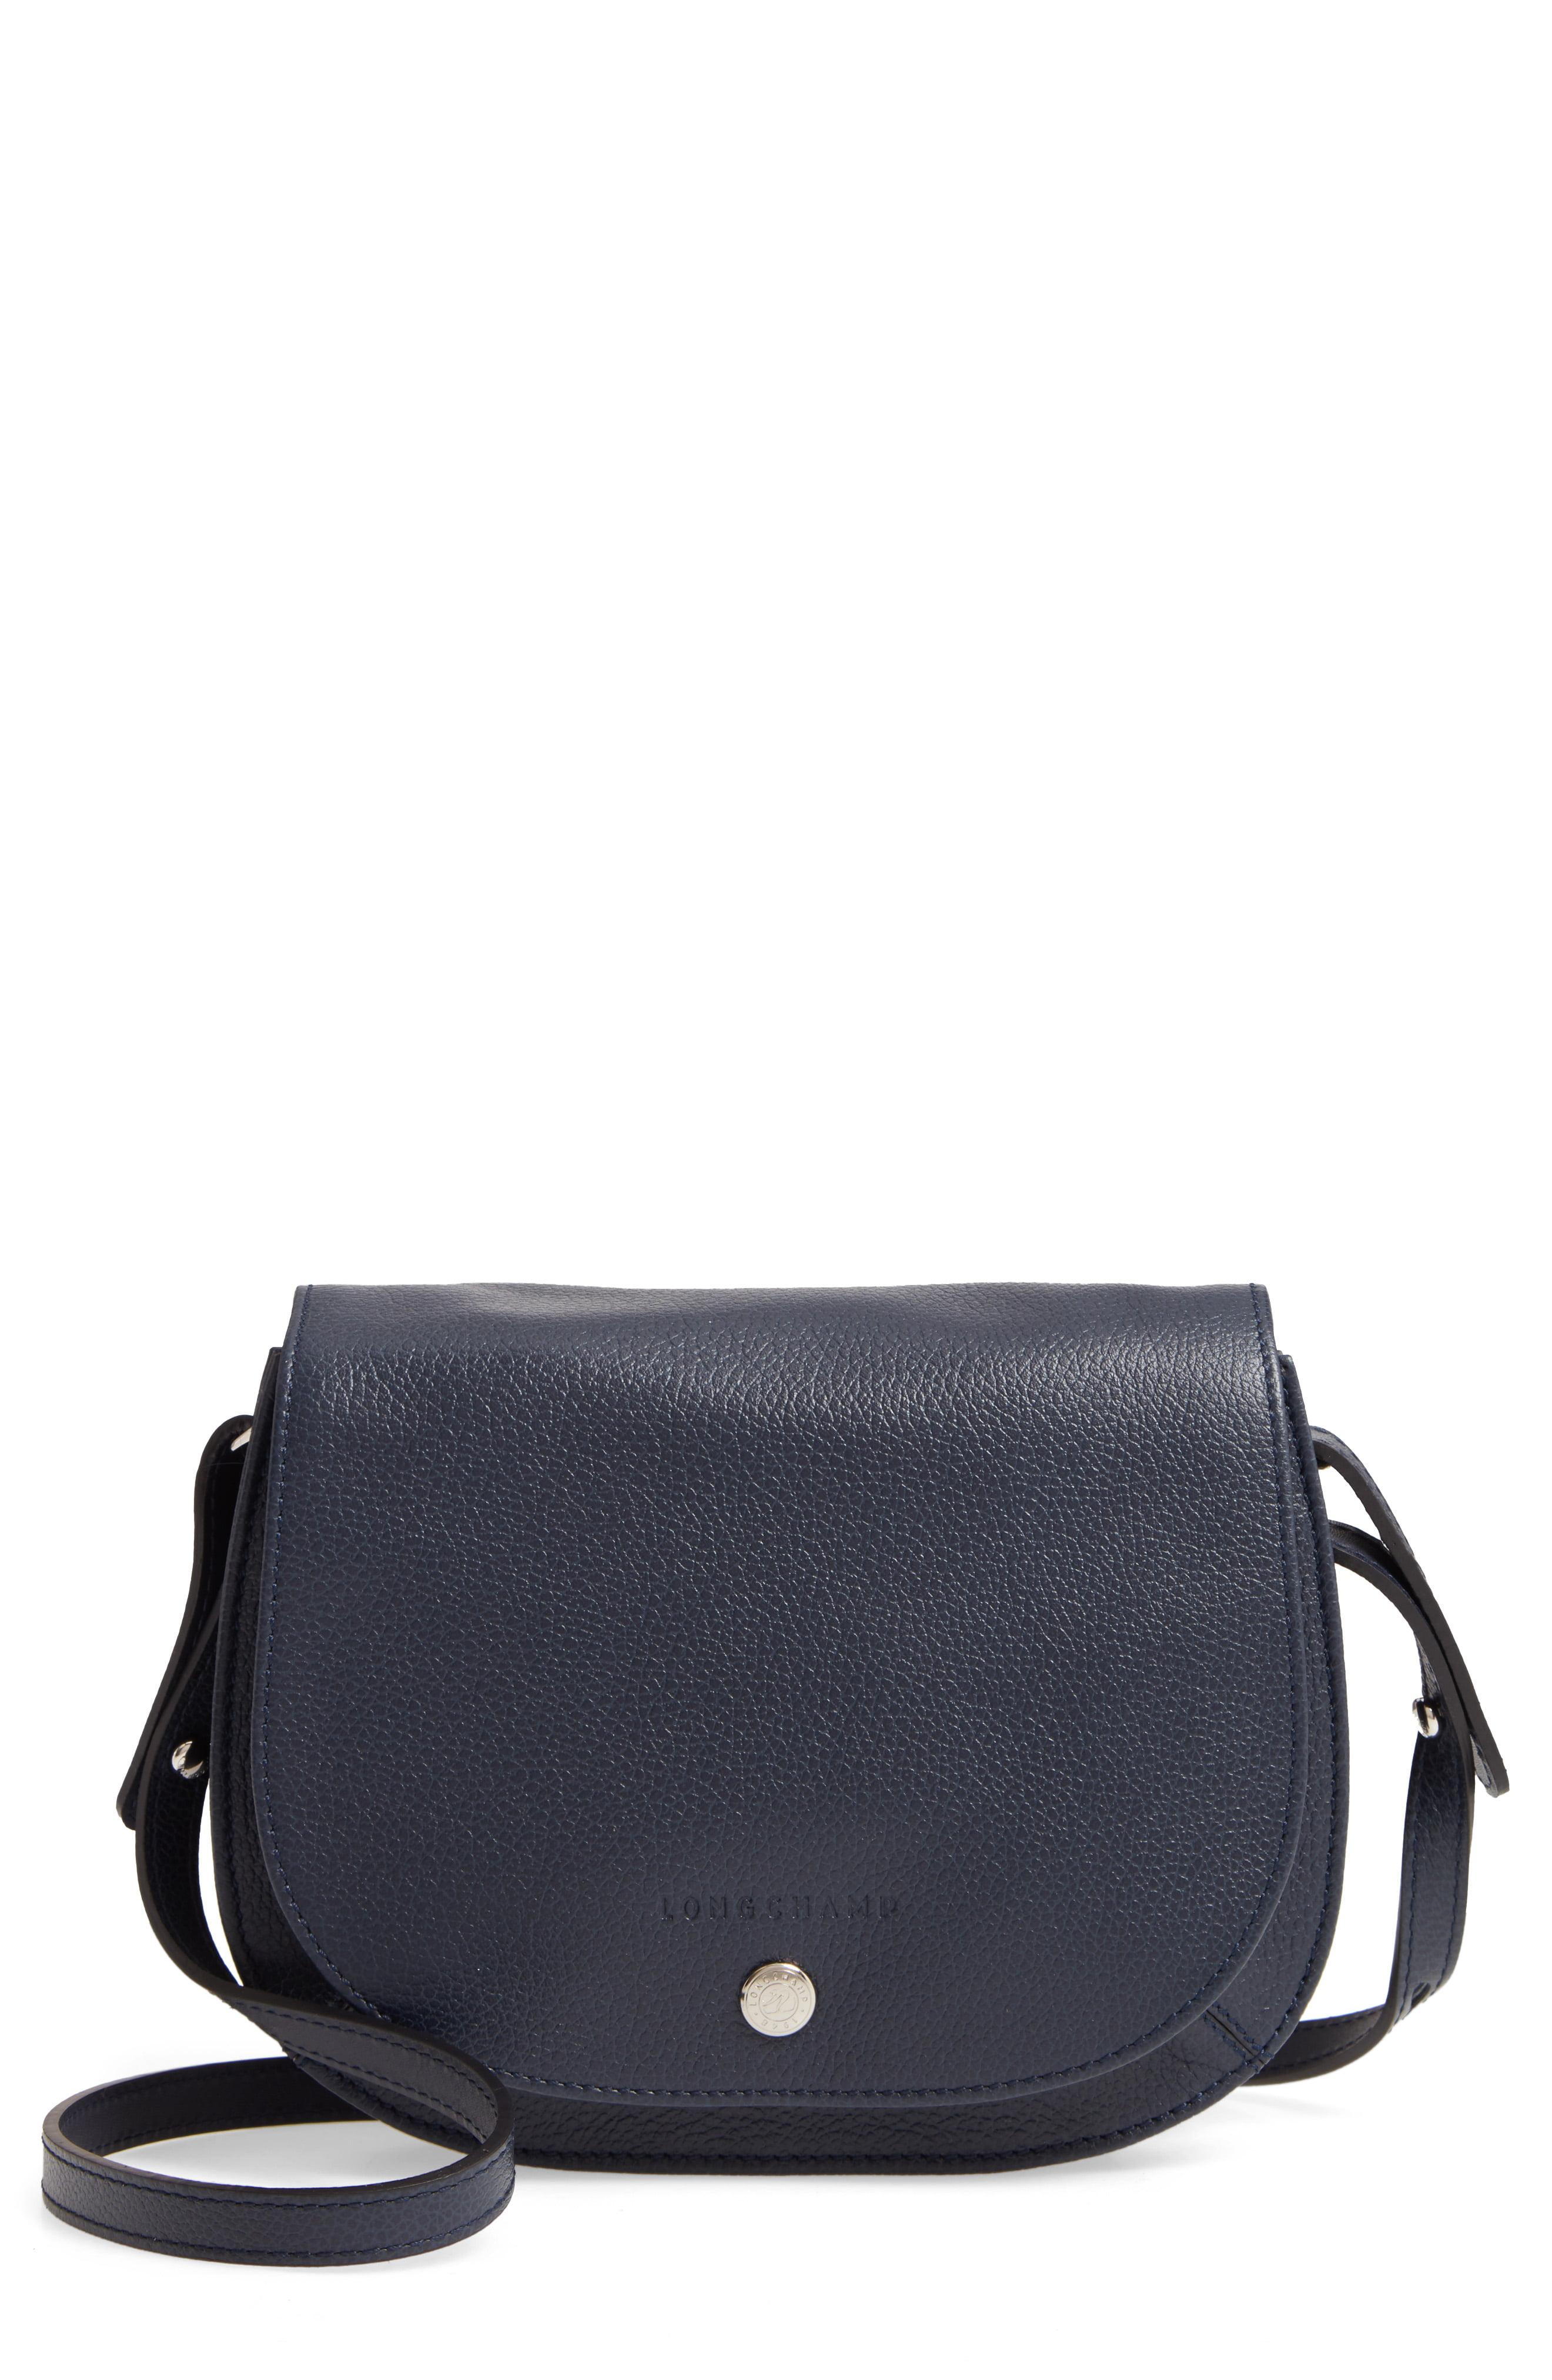 Longchamp Small Le Foulonne Leather Crossbody Bag in Navy (Blue) - Lyst